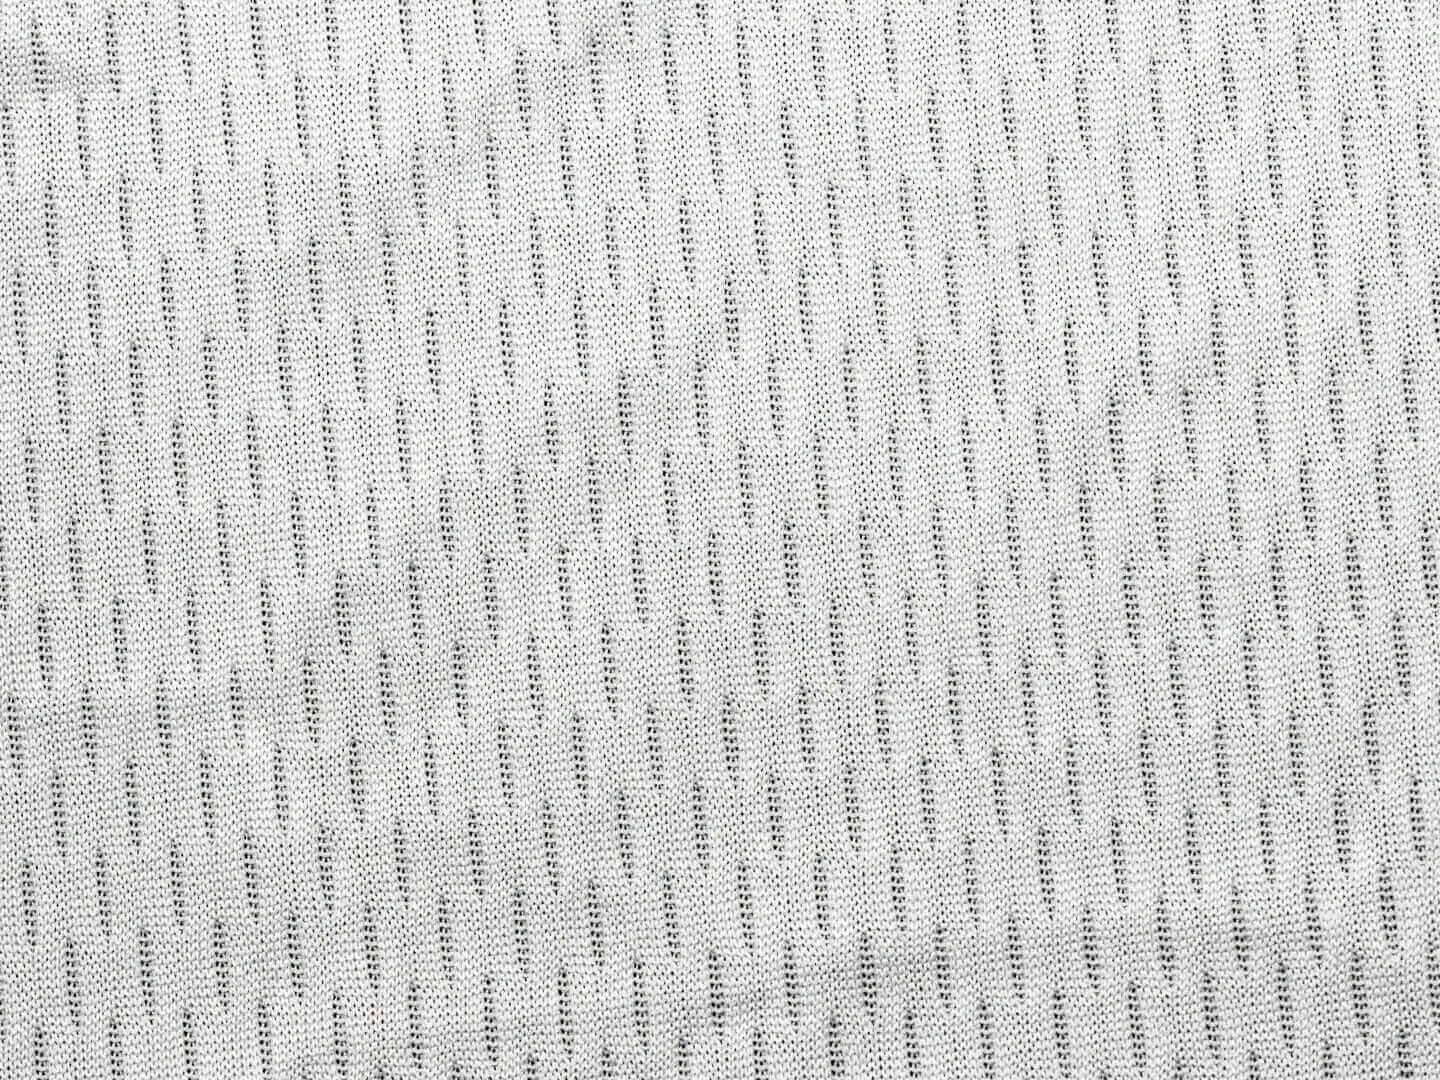 FabricLA 100% Polyester Football Mesh Fabric - 58/60 Inches (150